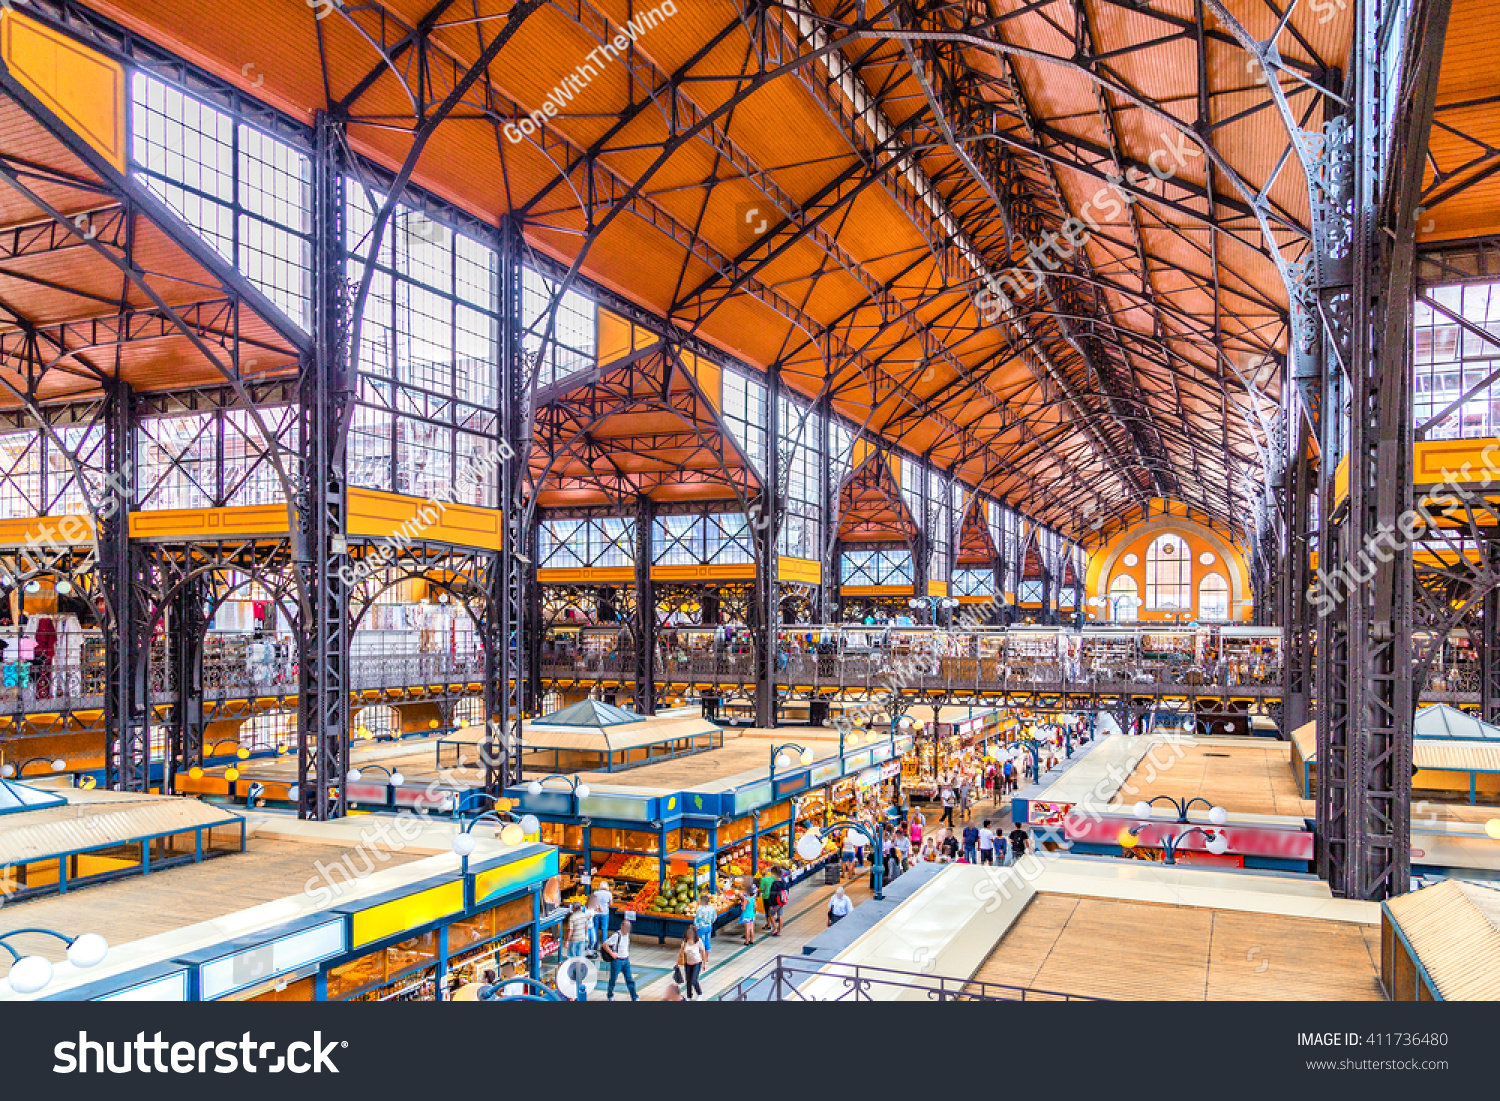 Interiors of Central Market Hall of Budapest, Hungary #411736480